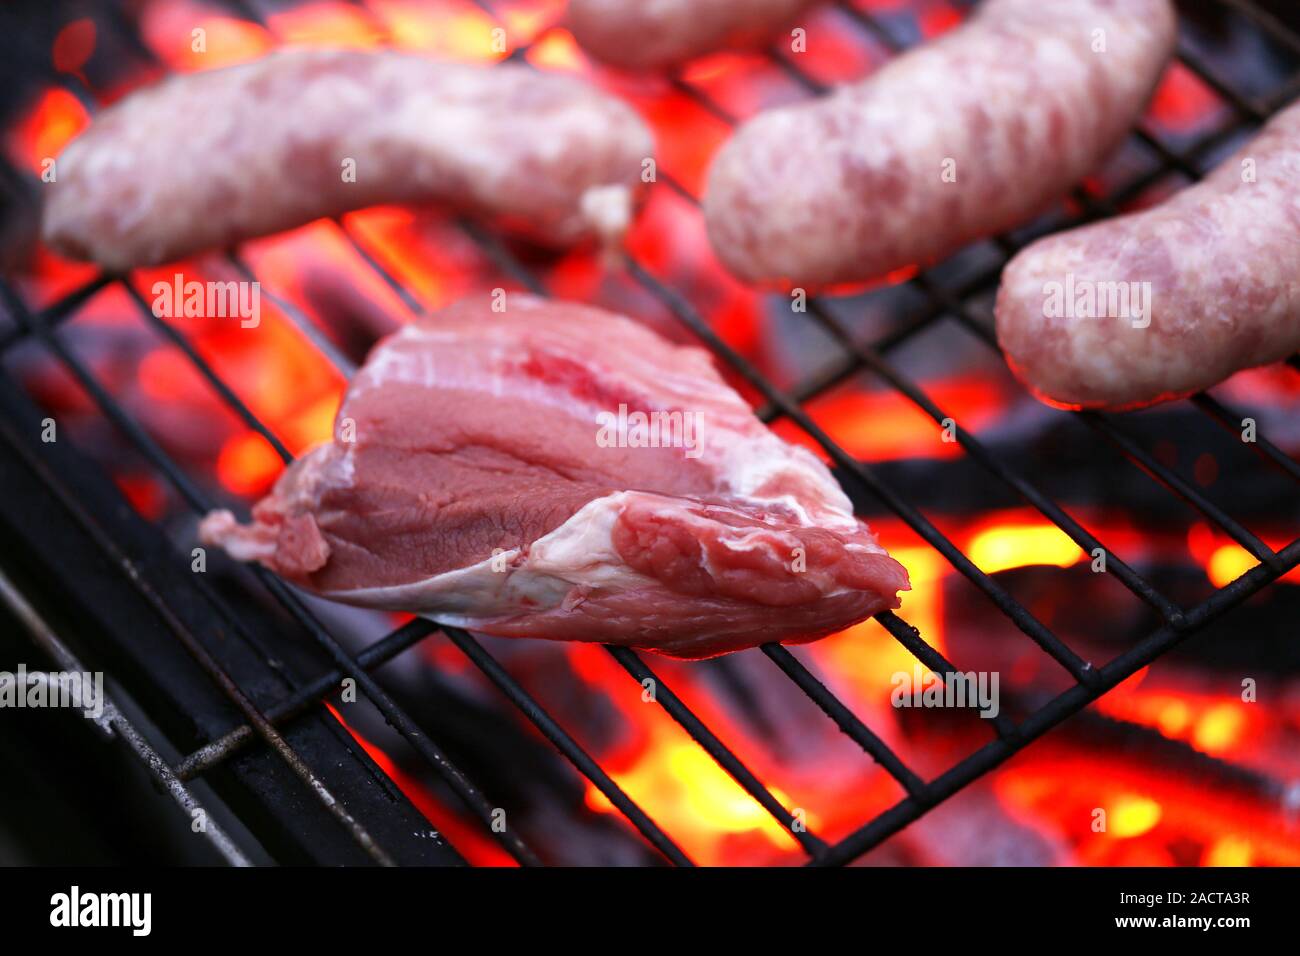 Raw meat and sausages on BBQ. Stock Photo